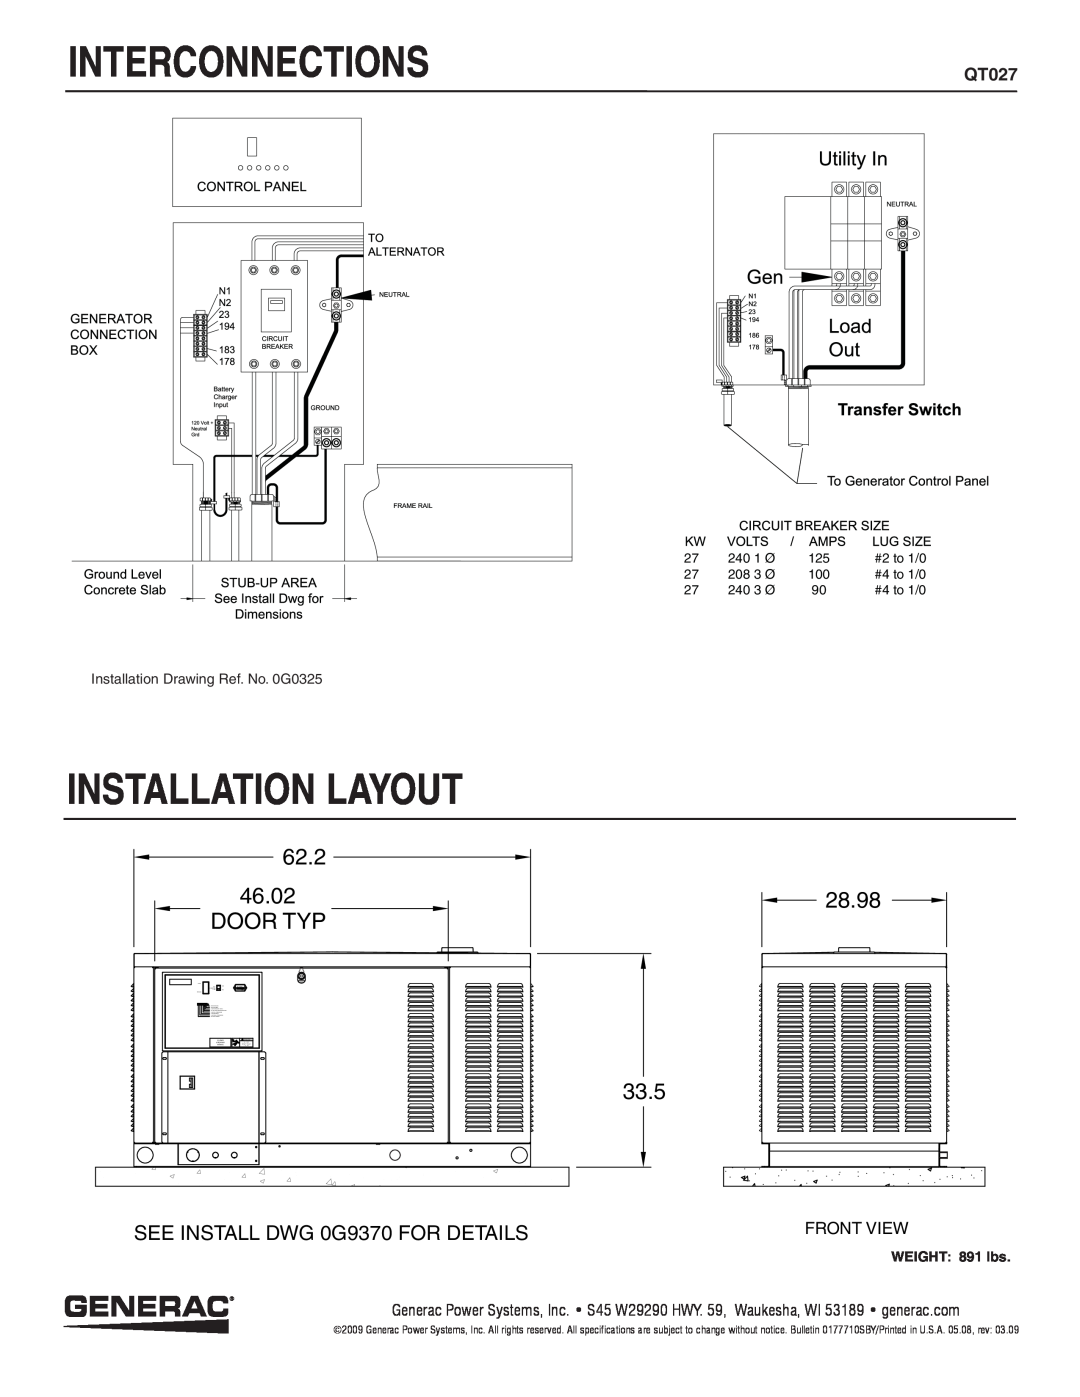 Generac Power Systems QT02724JNAX Interconnections, Installation Layout, 62.2 46.02 DOOR TYP, 28.98, 33.5, WEIGHT 891 lbs 